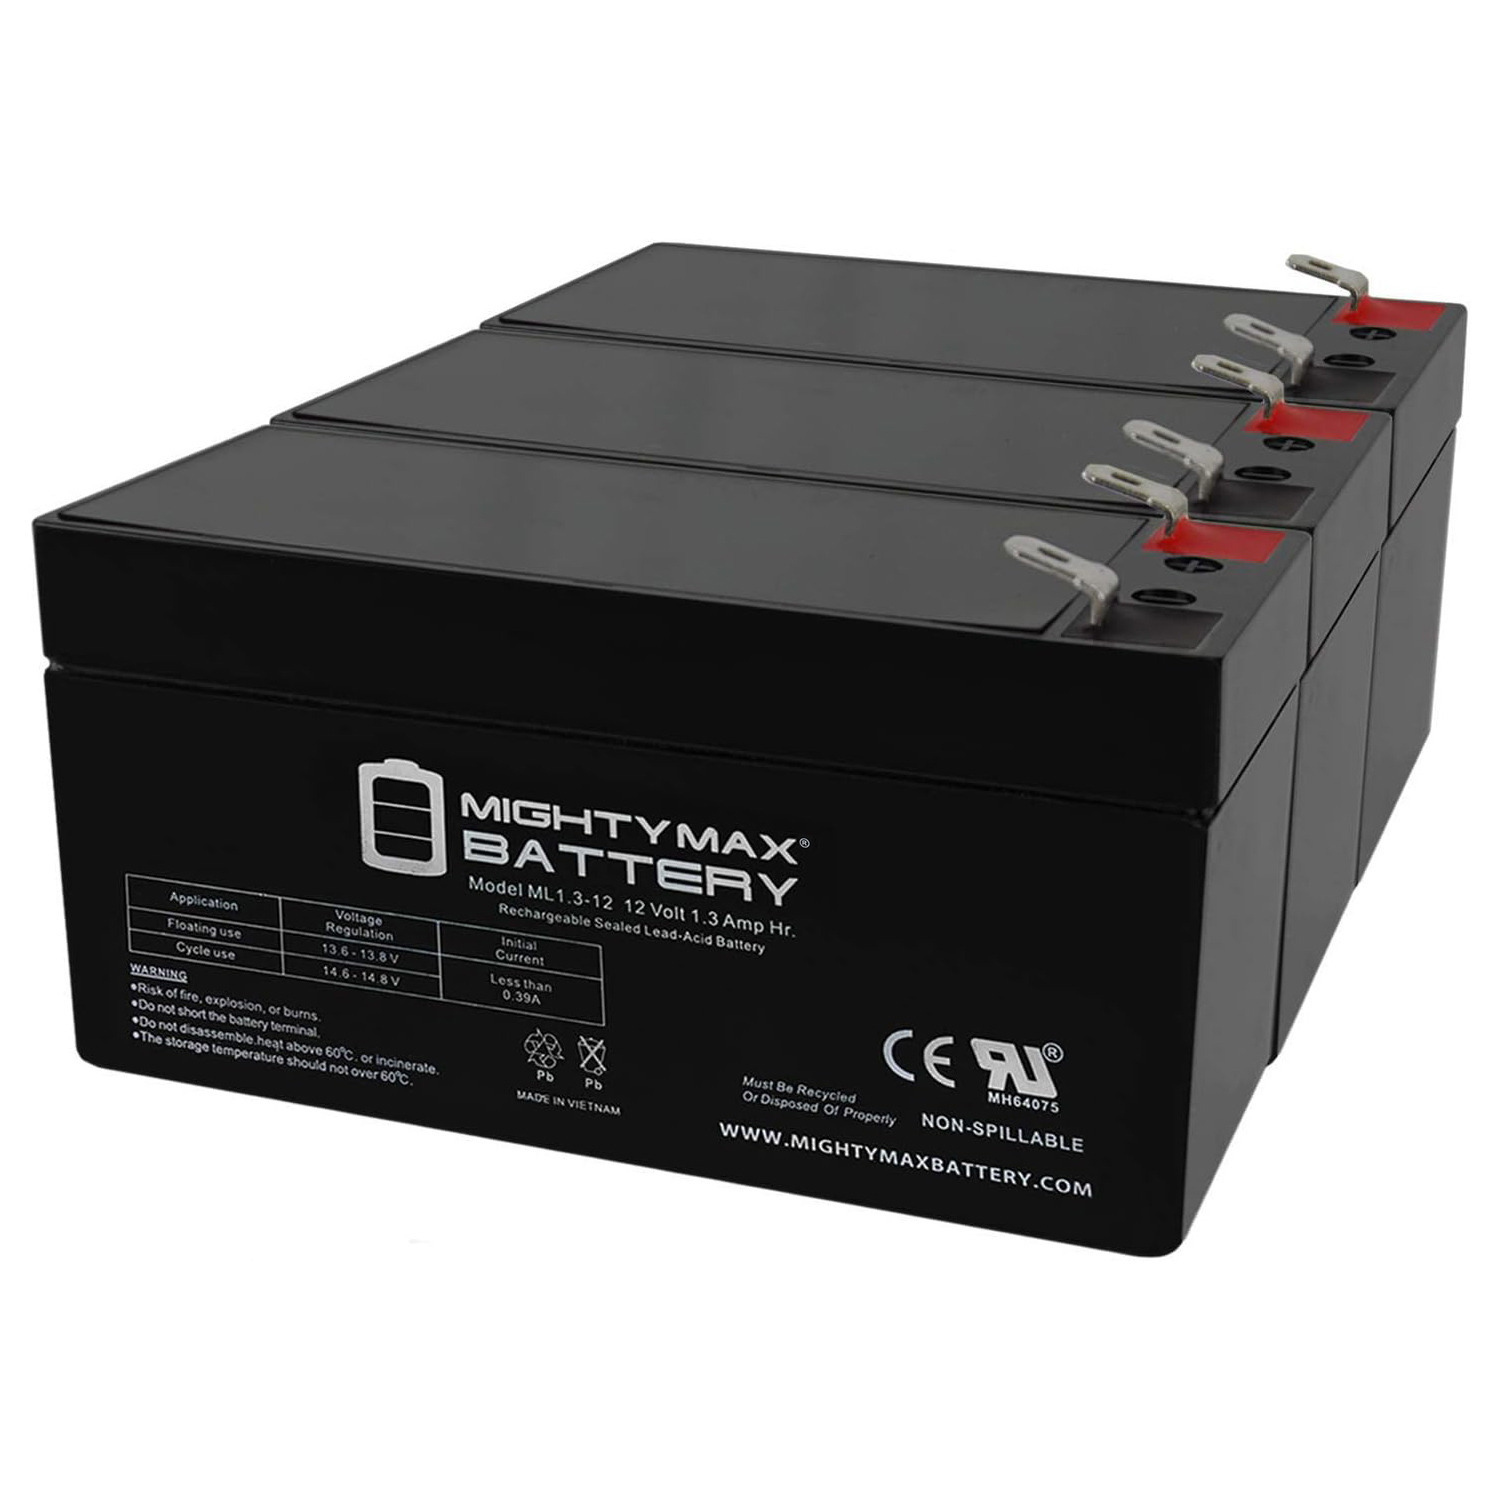 12V 1.3Ah Replacement Battery for Wangpin 6FM1.3 - 3 Pack